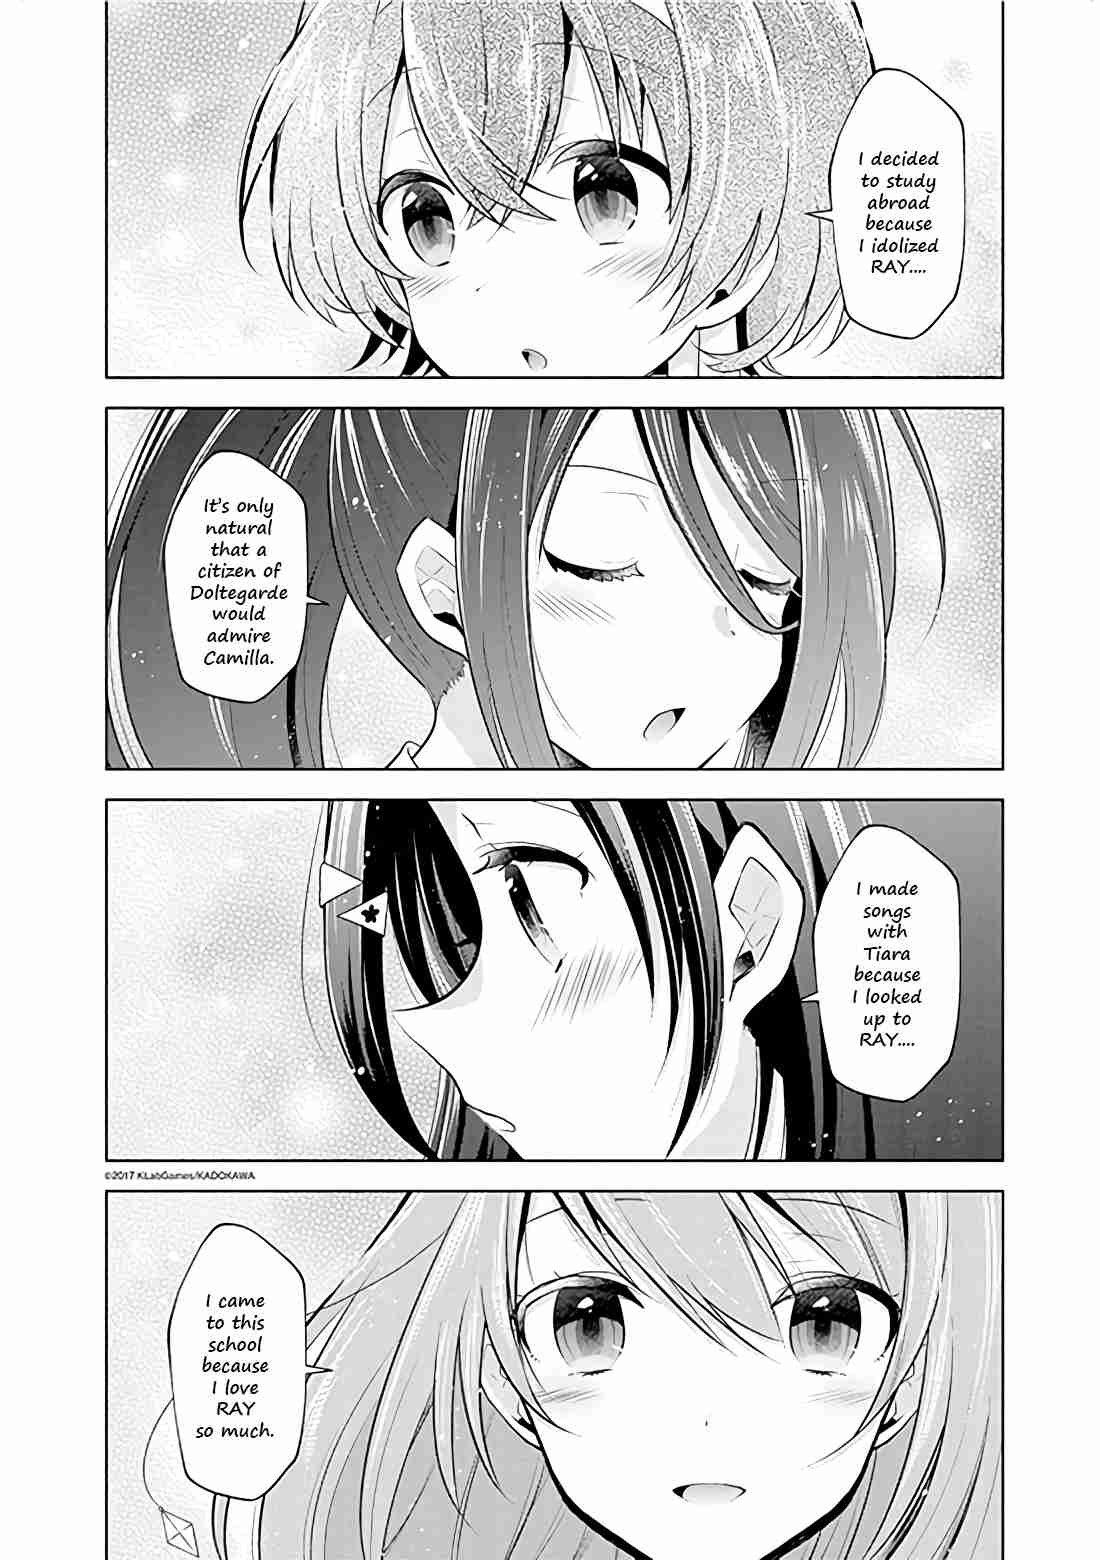 Lapis Re:LiGHTs Vol. 1 Ch. 4 Our Prelude (LiGHTs)